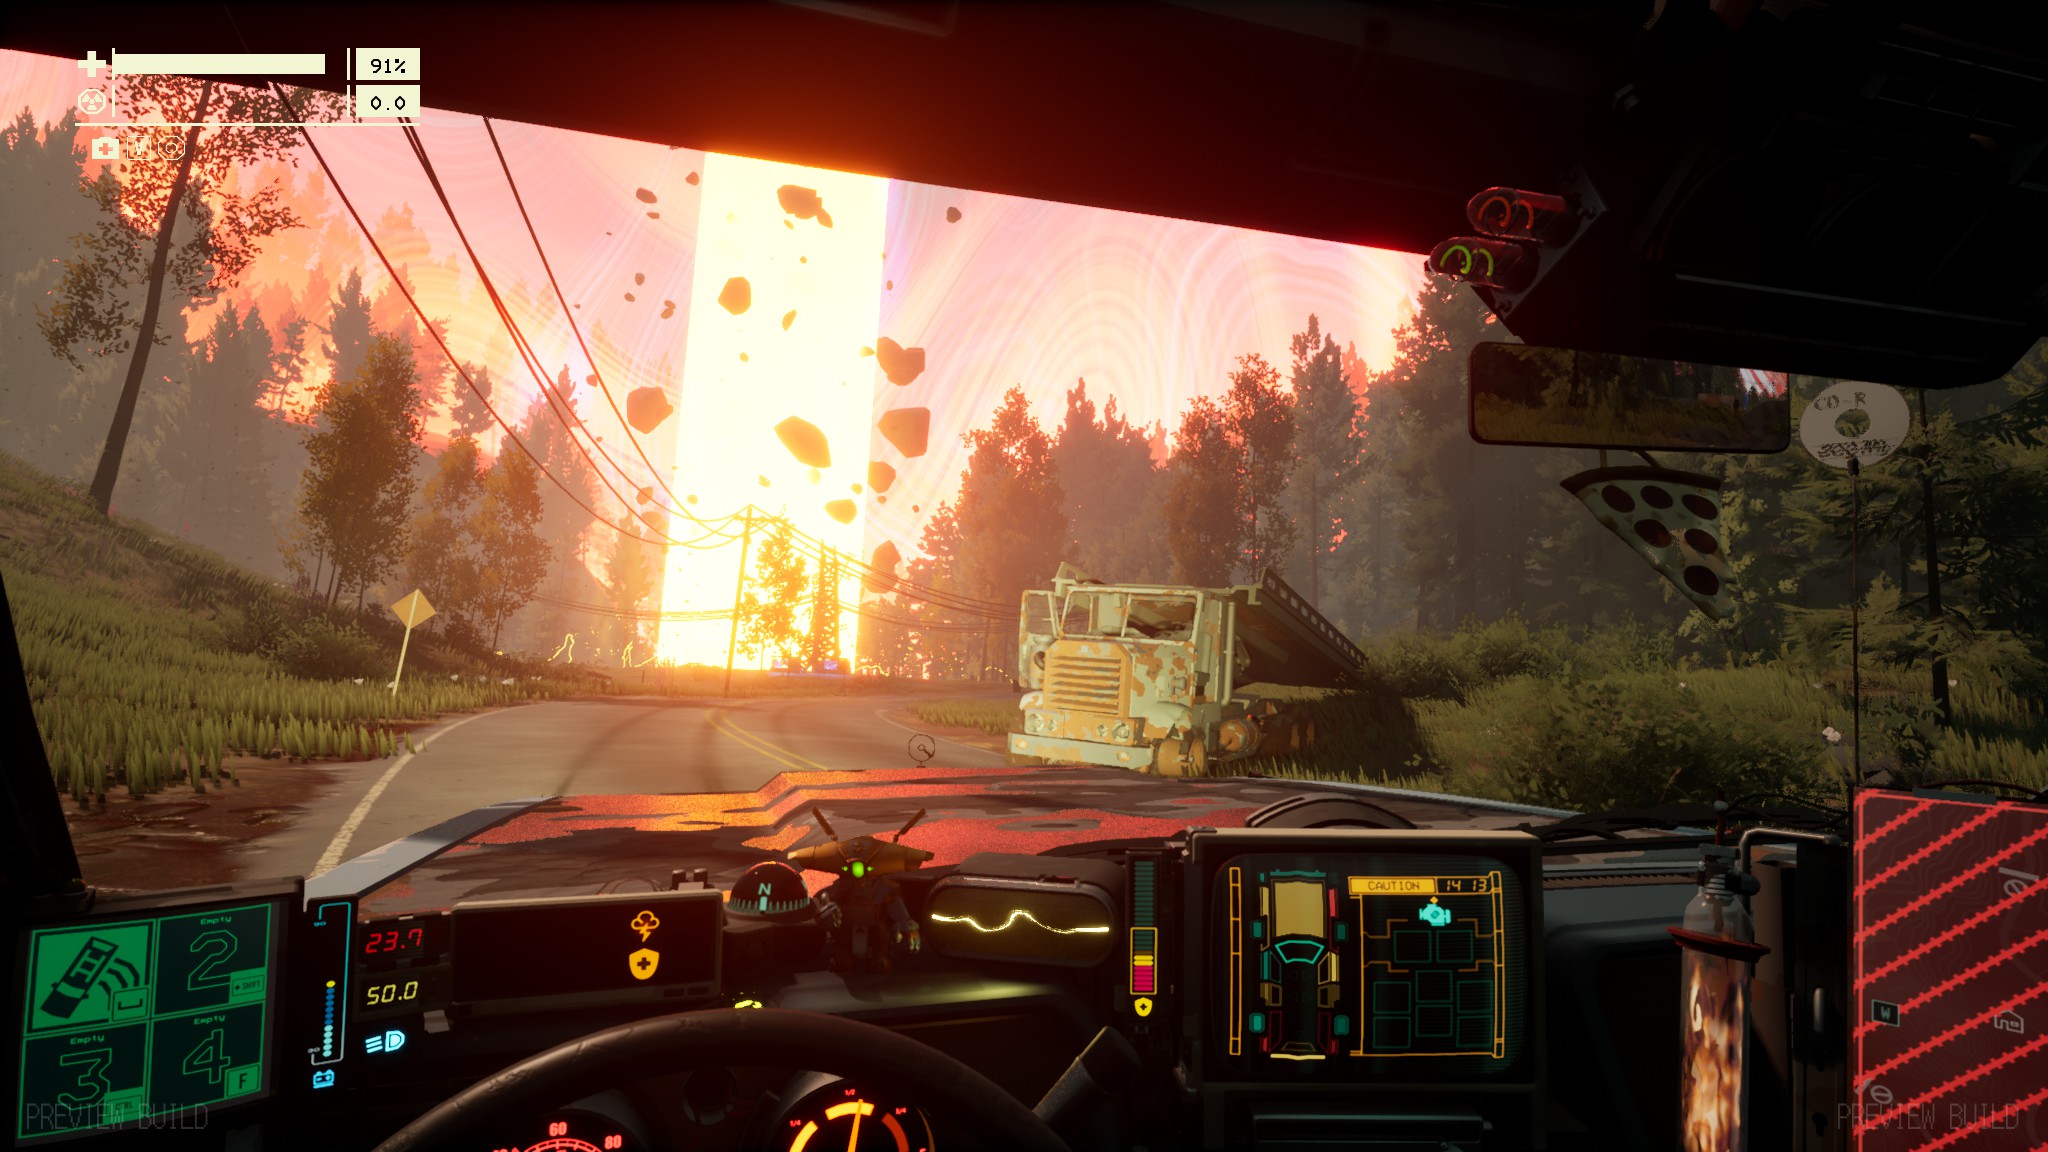 Driving survival game